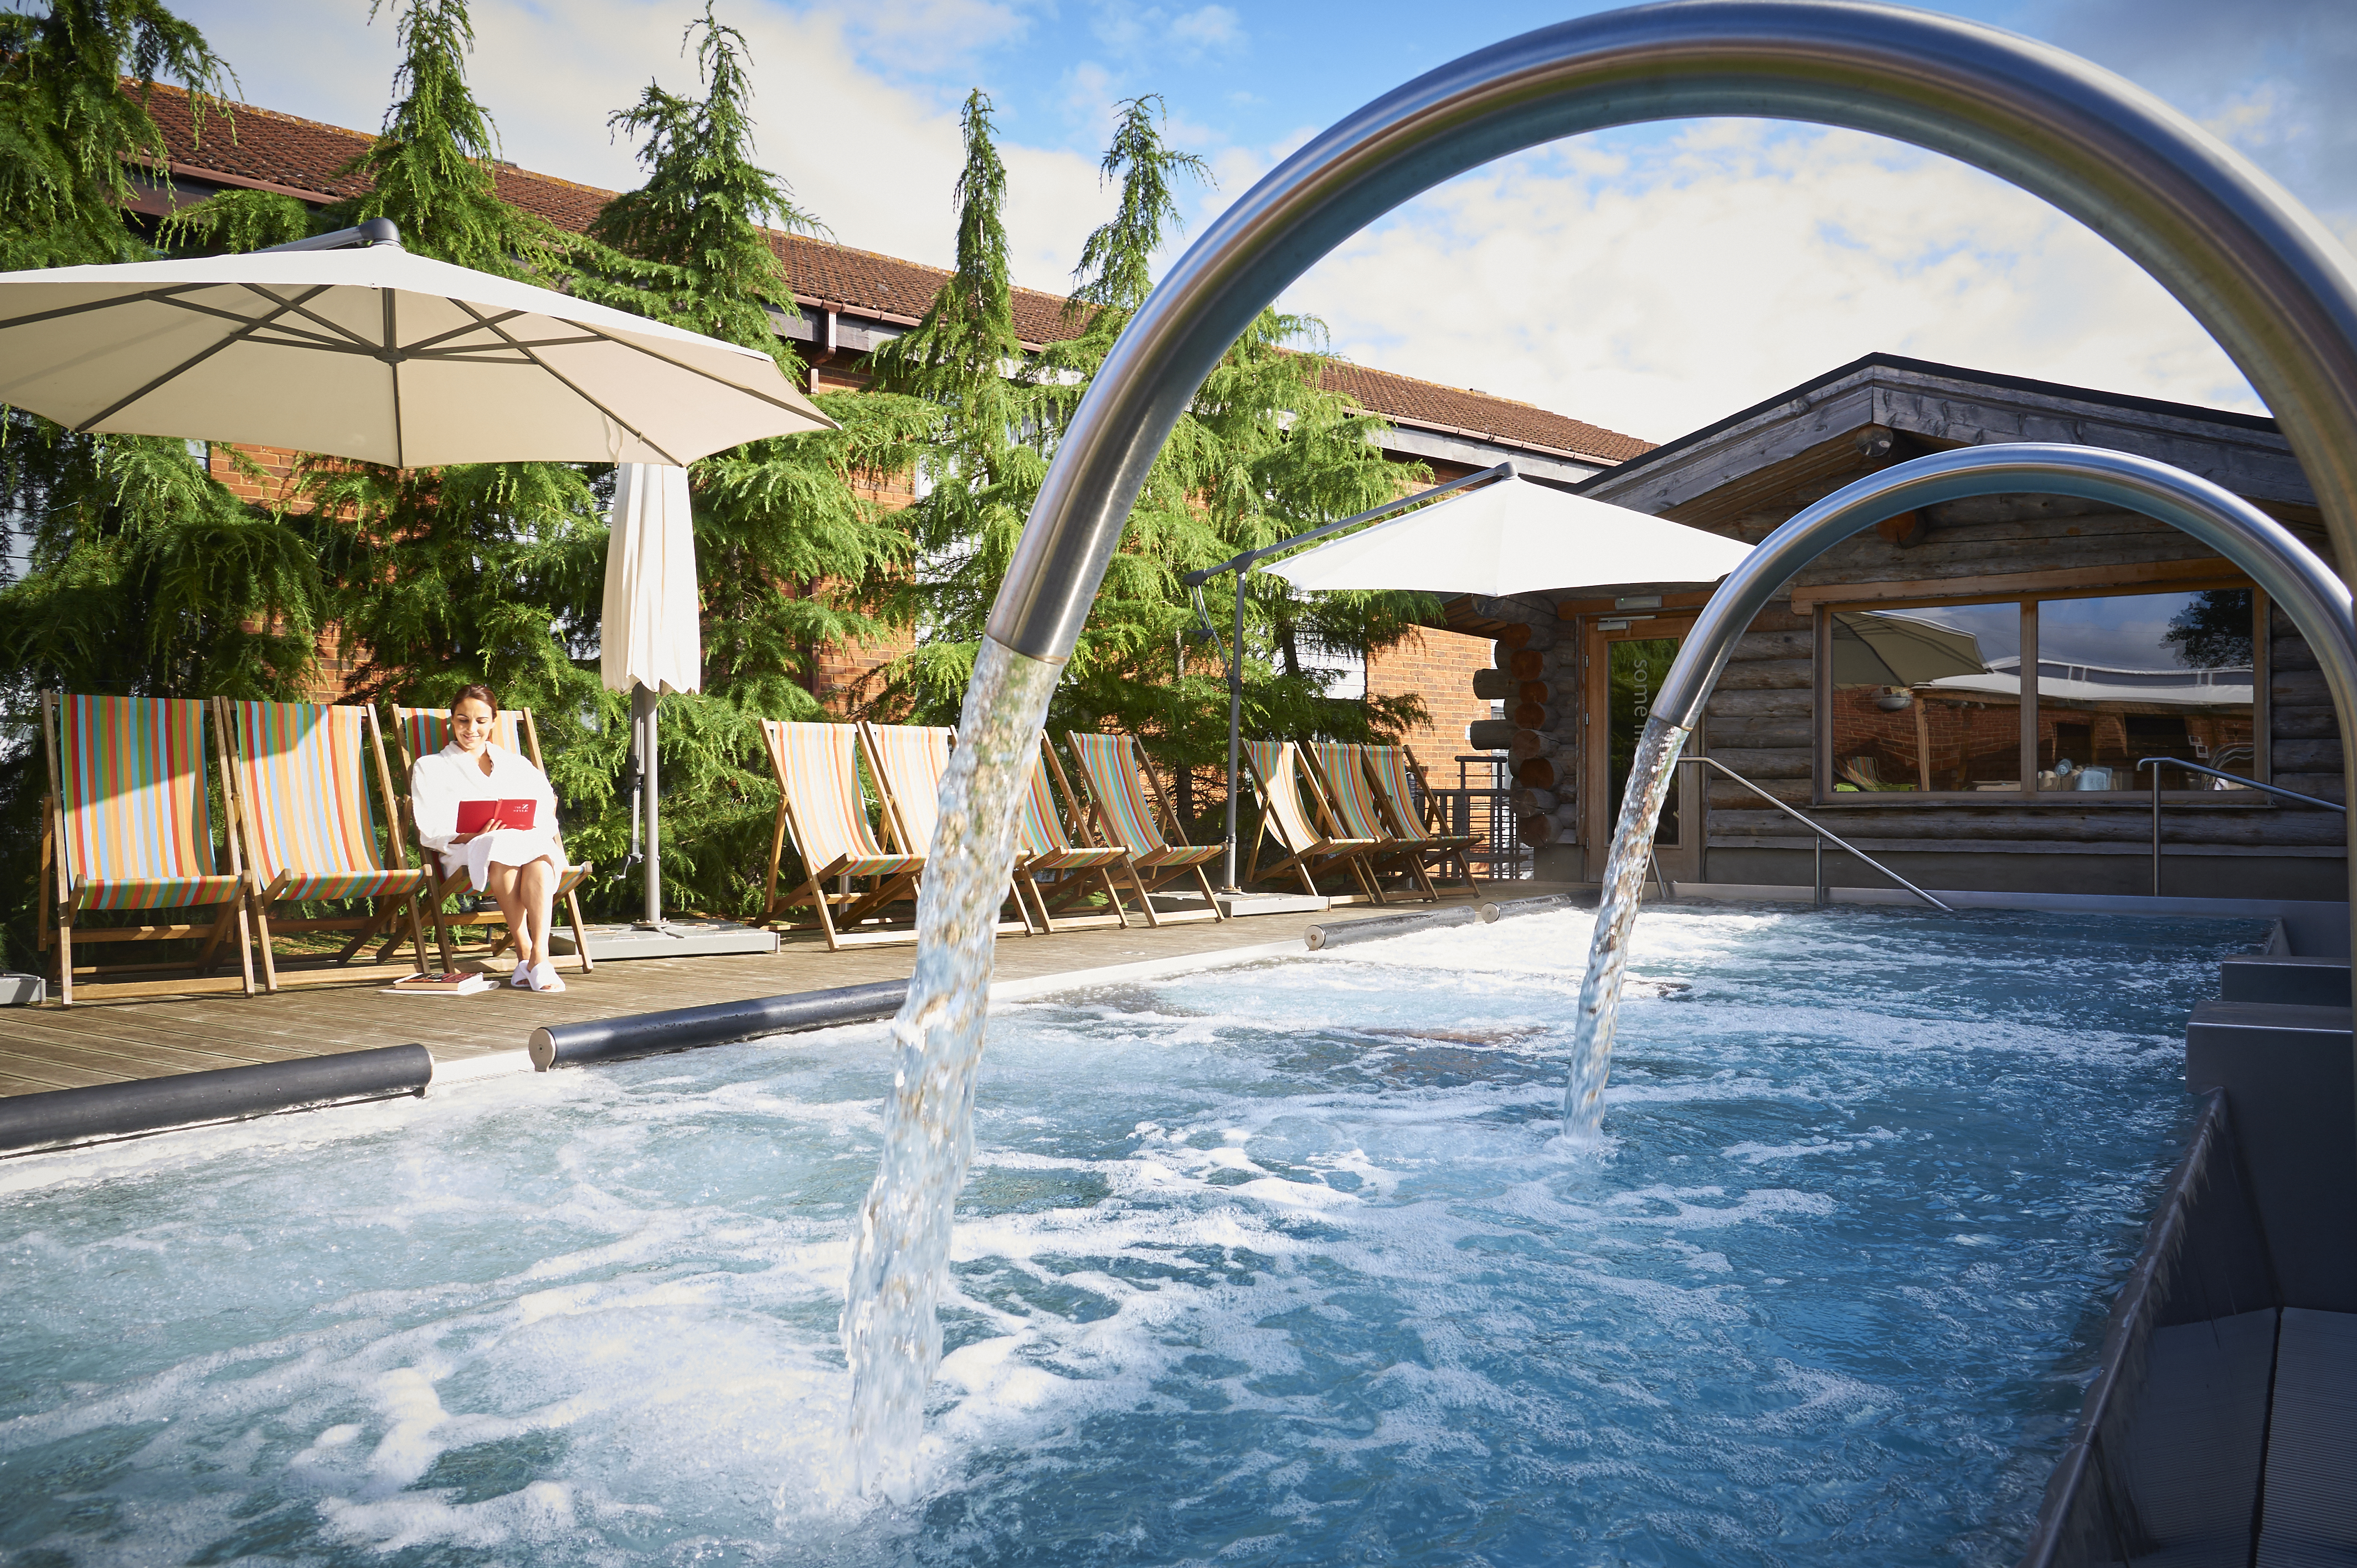 Y Spa at Wyboston Lakes Resort is a finalist in Good Spa Awards 2023